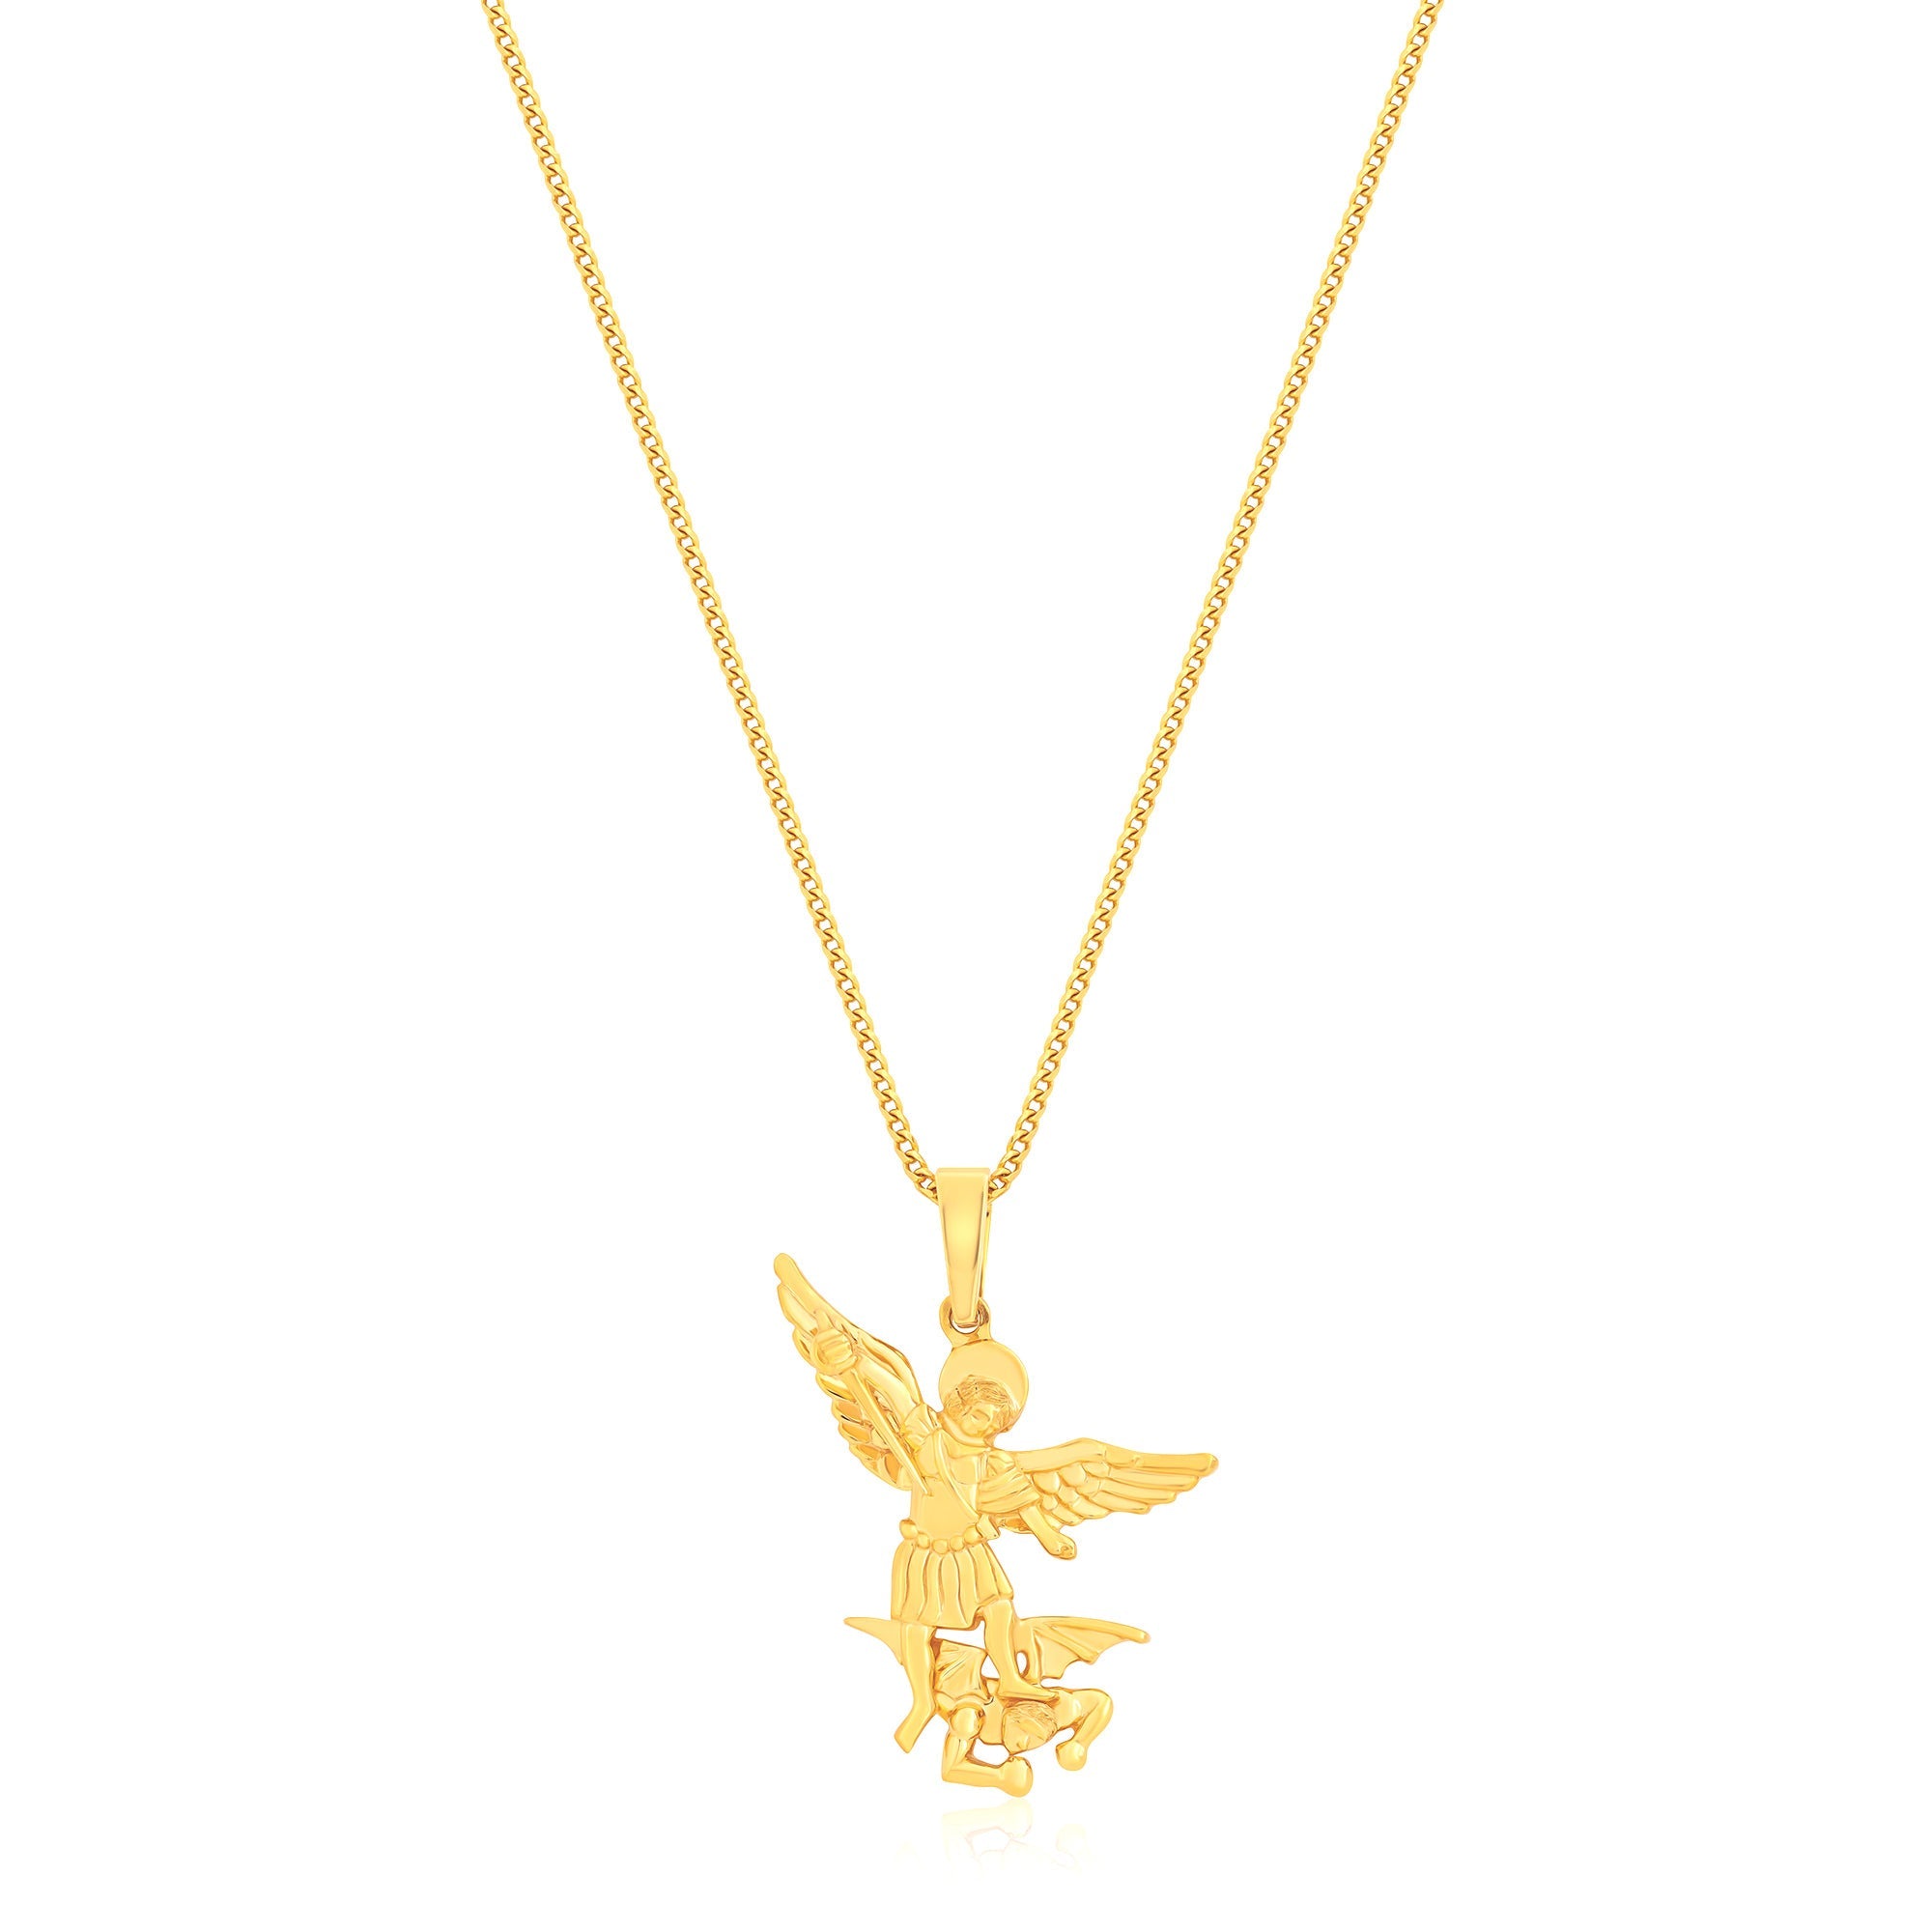 Micro Saint Michael Arch Angel Piece (Solid Gold) (14K YELLOW GOLD) - IF & Co. Custom Jewelers